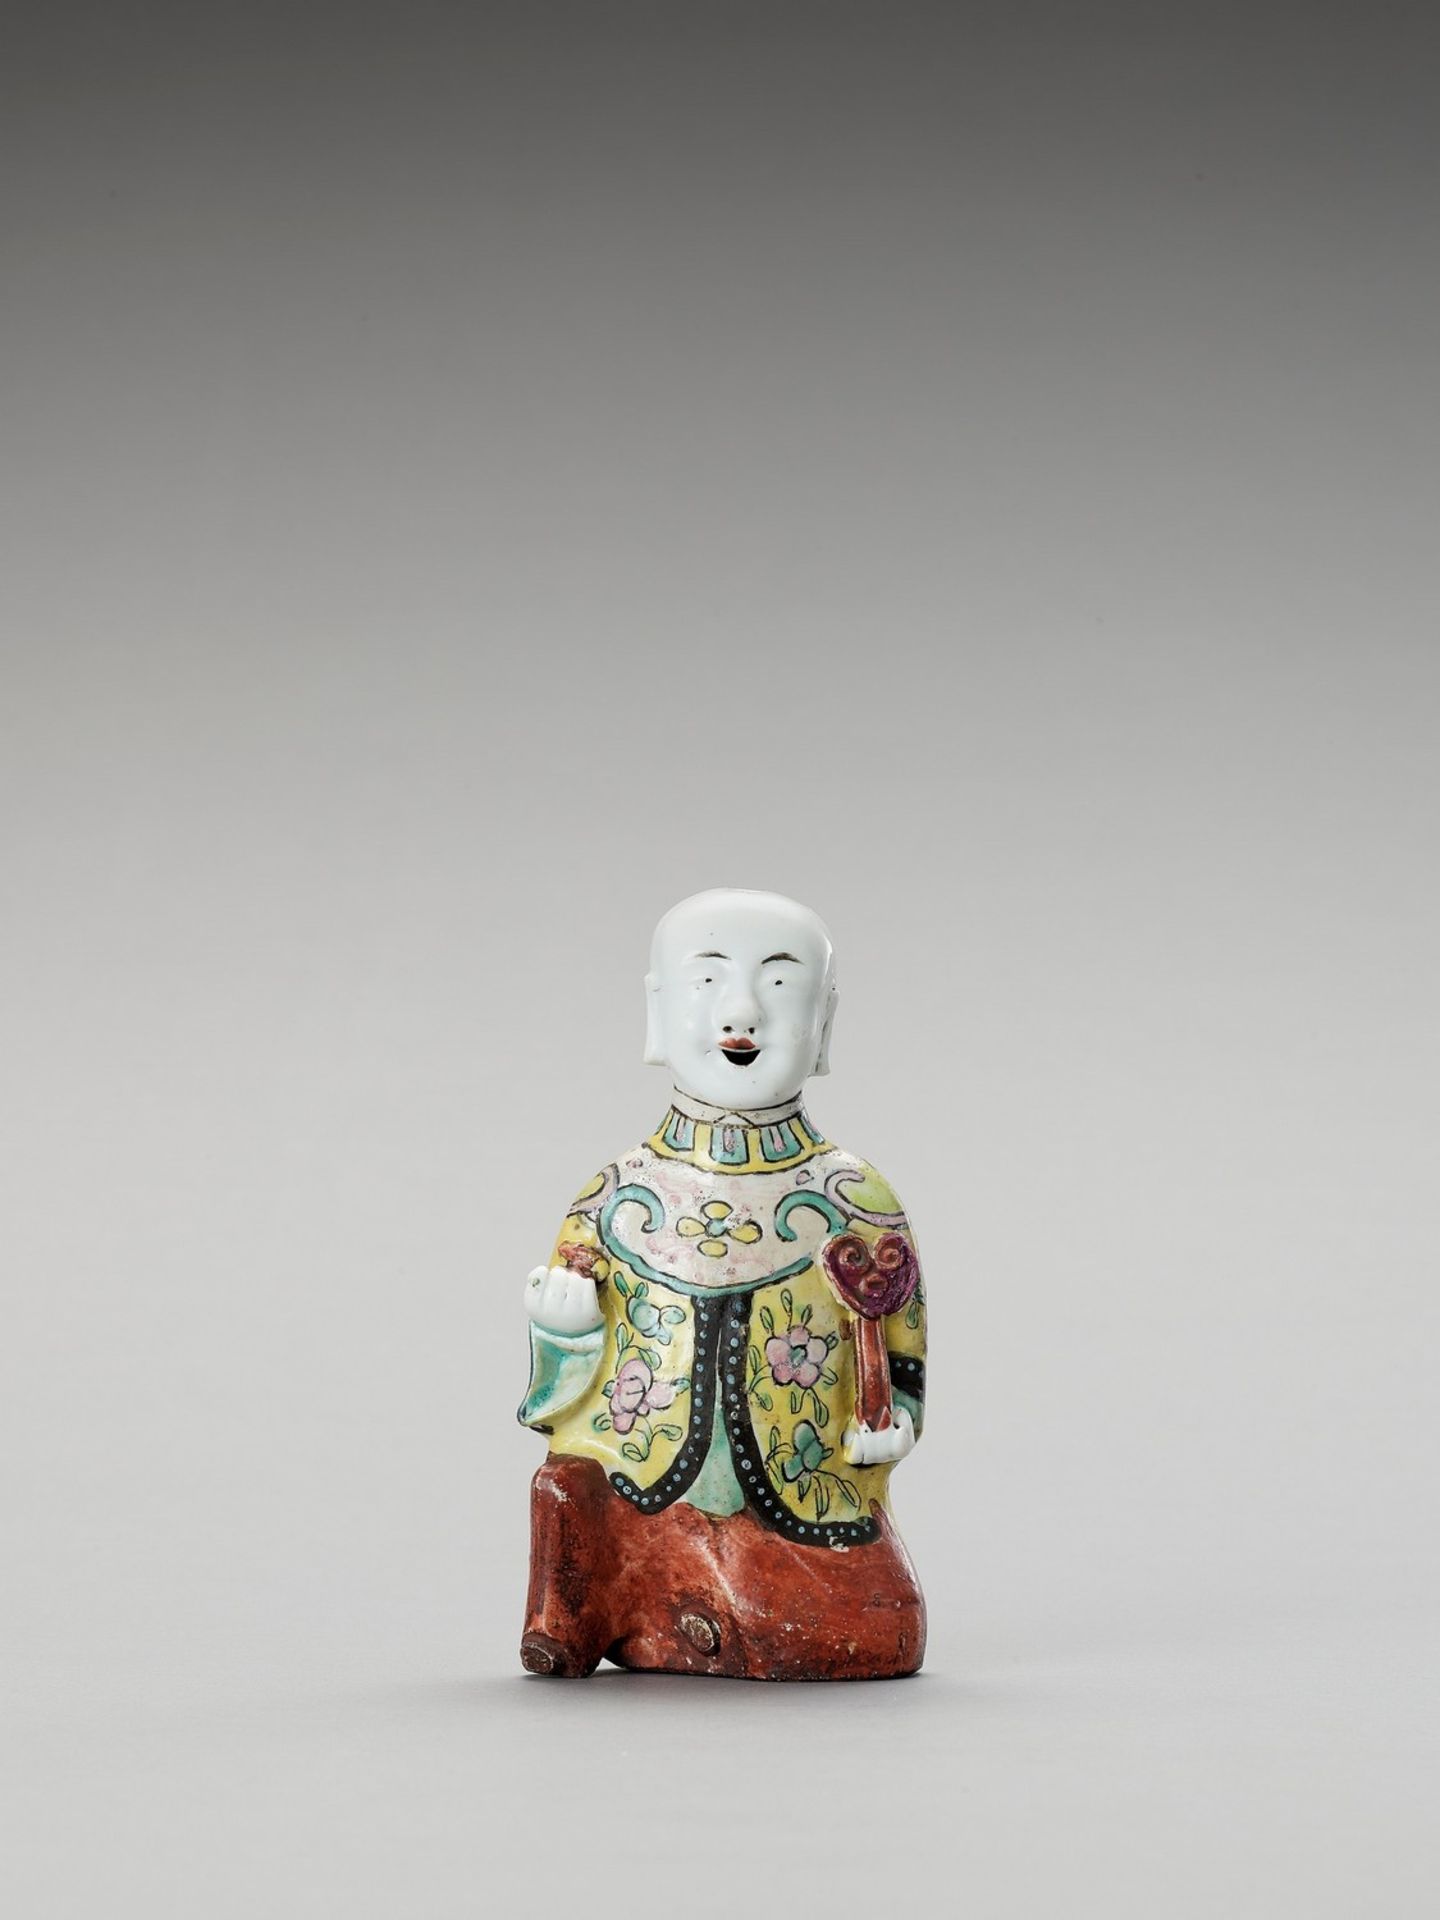 A FAMILLE ROSE PORCELAIN FIGURE OF A LAUGHING BOY